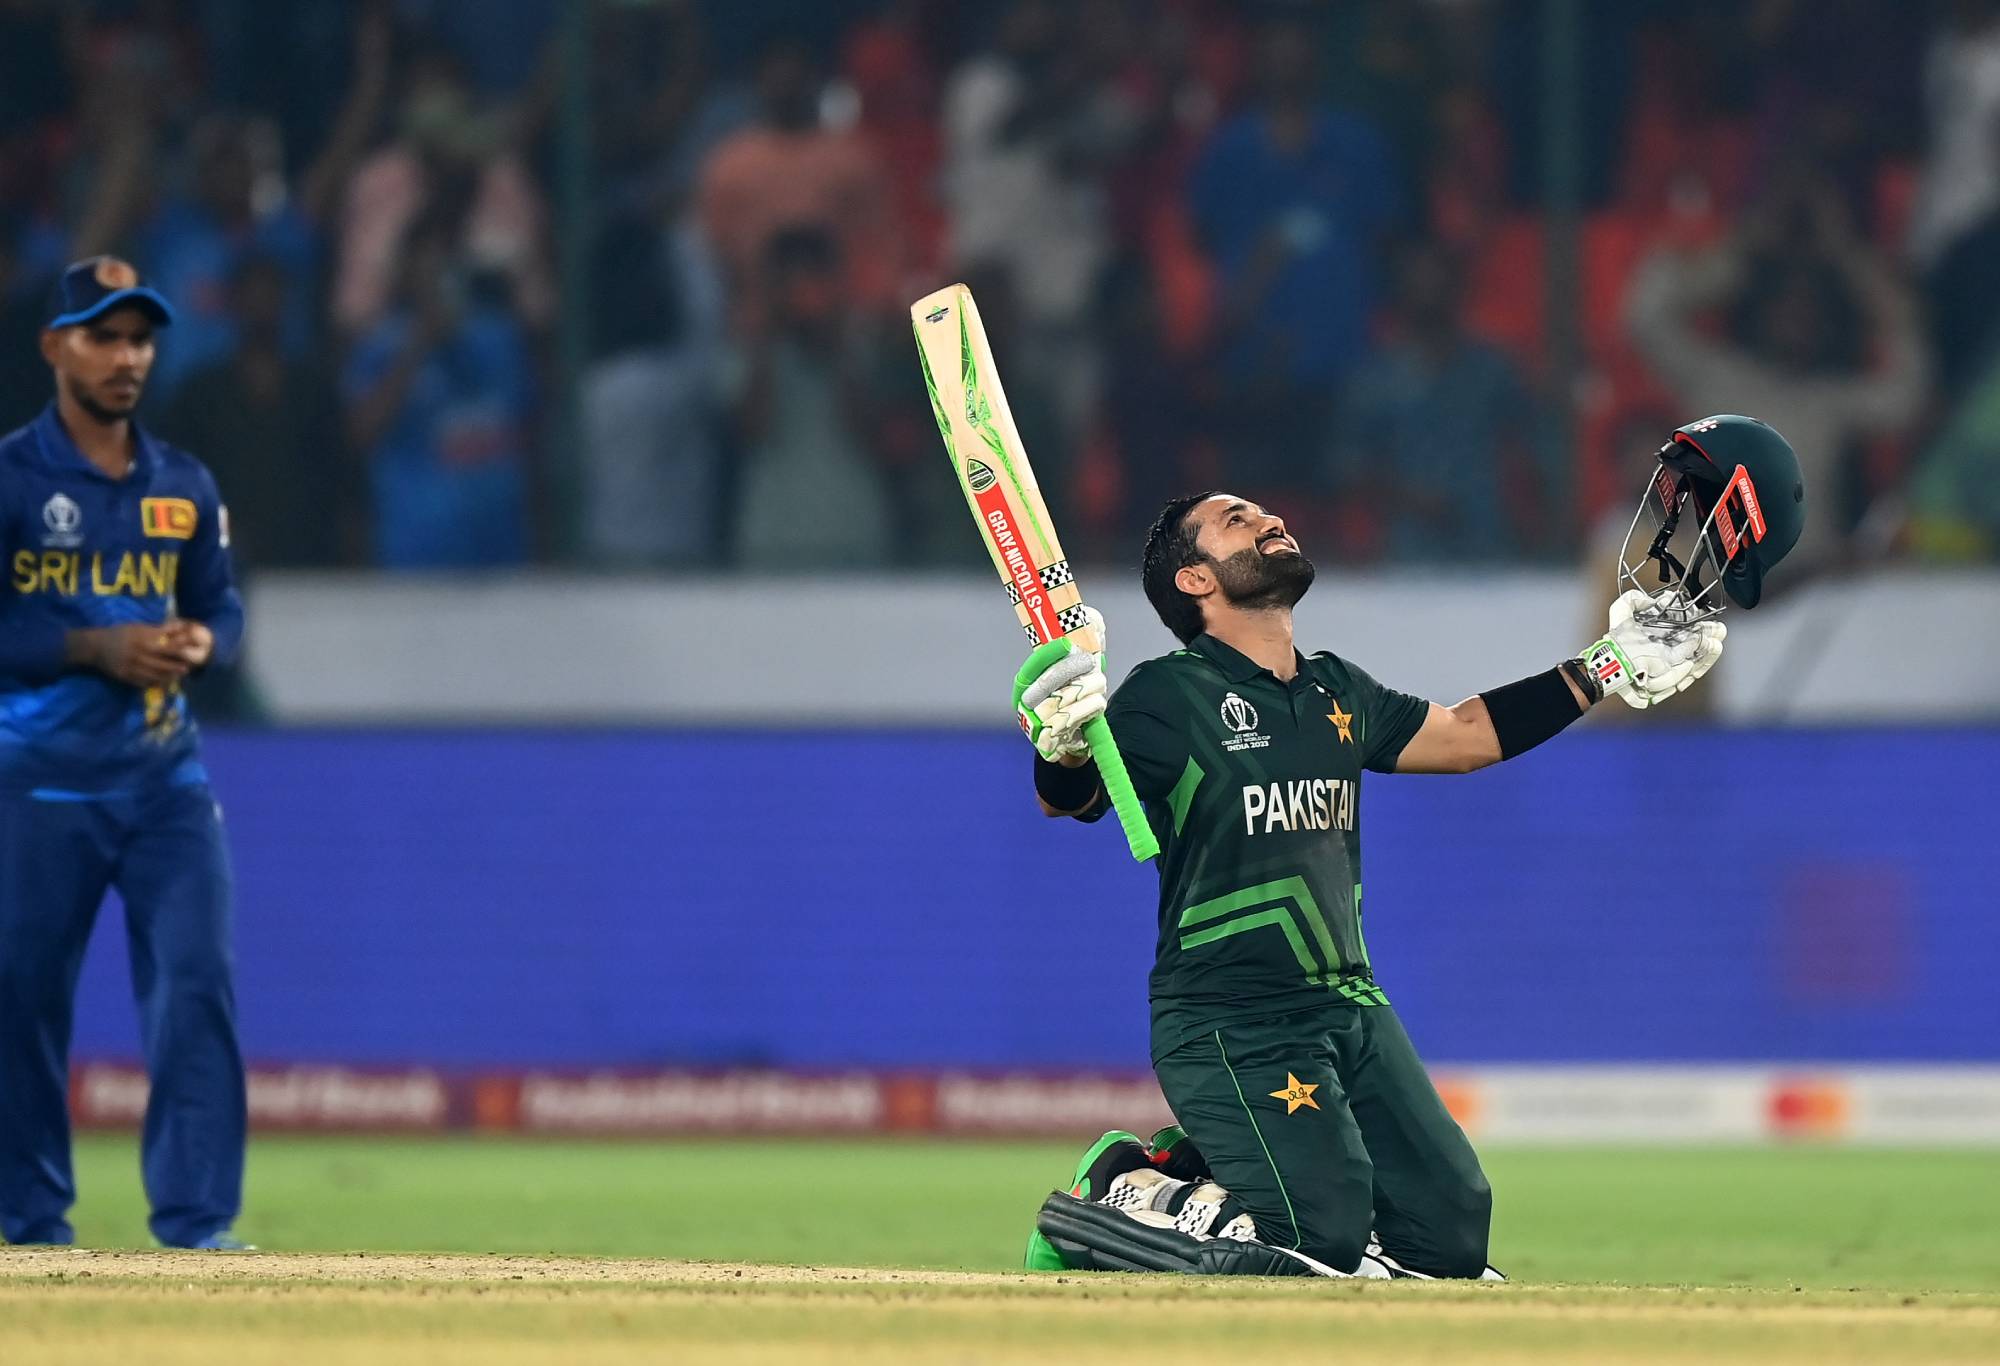 HYDERABAD, INDIA - OCTOBER 10: Mohammad Rizwan of Pakistan celebrates following the ICC Men's Cricket World Cup India 2023 between Pakistan and Sri Lanka at Rajiv Gandhi International Stadium on October 10, 2023 in Hyderabad, India. (Photo by Alex Davidson-ICC/ICC via Getty Images)